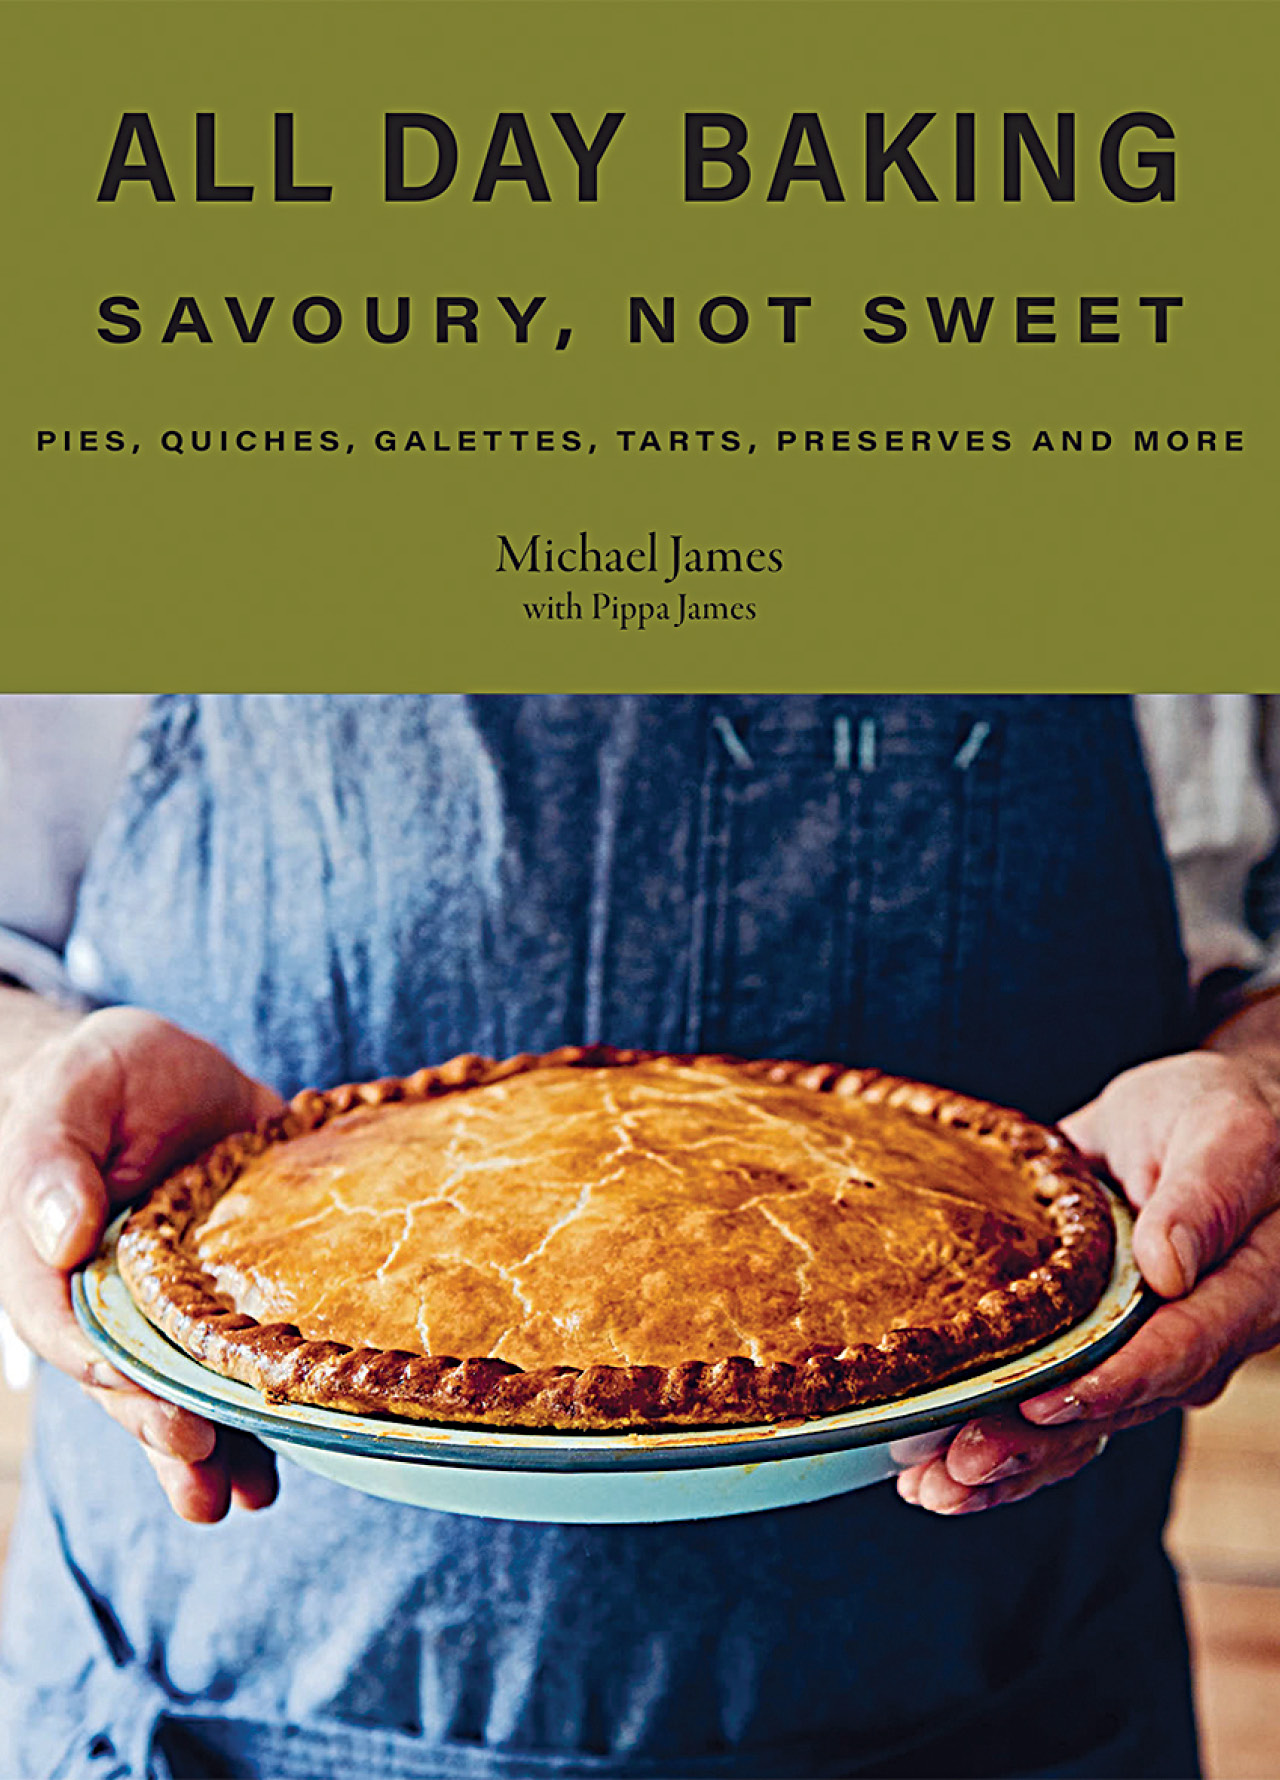 The cover of the book All Day Baking: Savoury, Not Sweet by Michael and Pippa James (Hardie Grant)